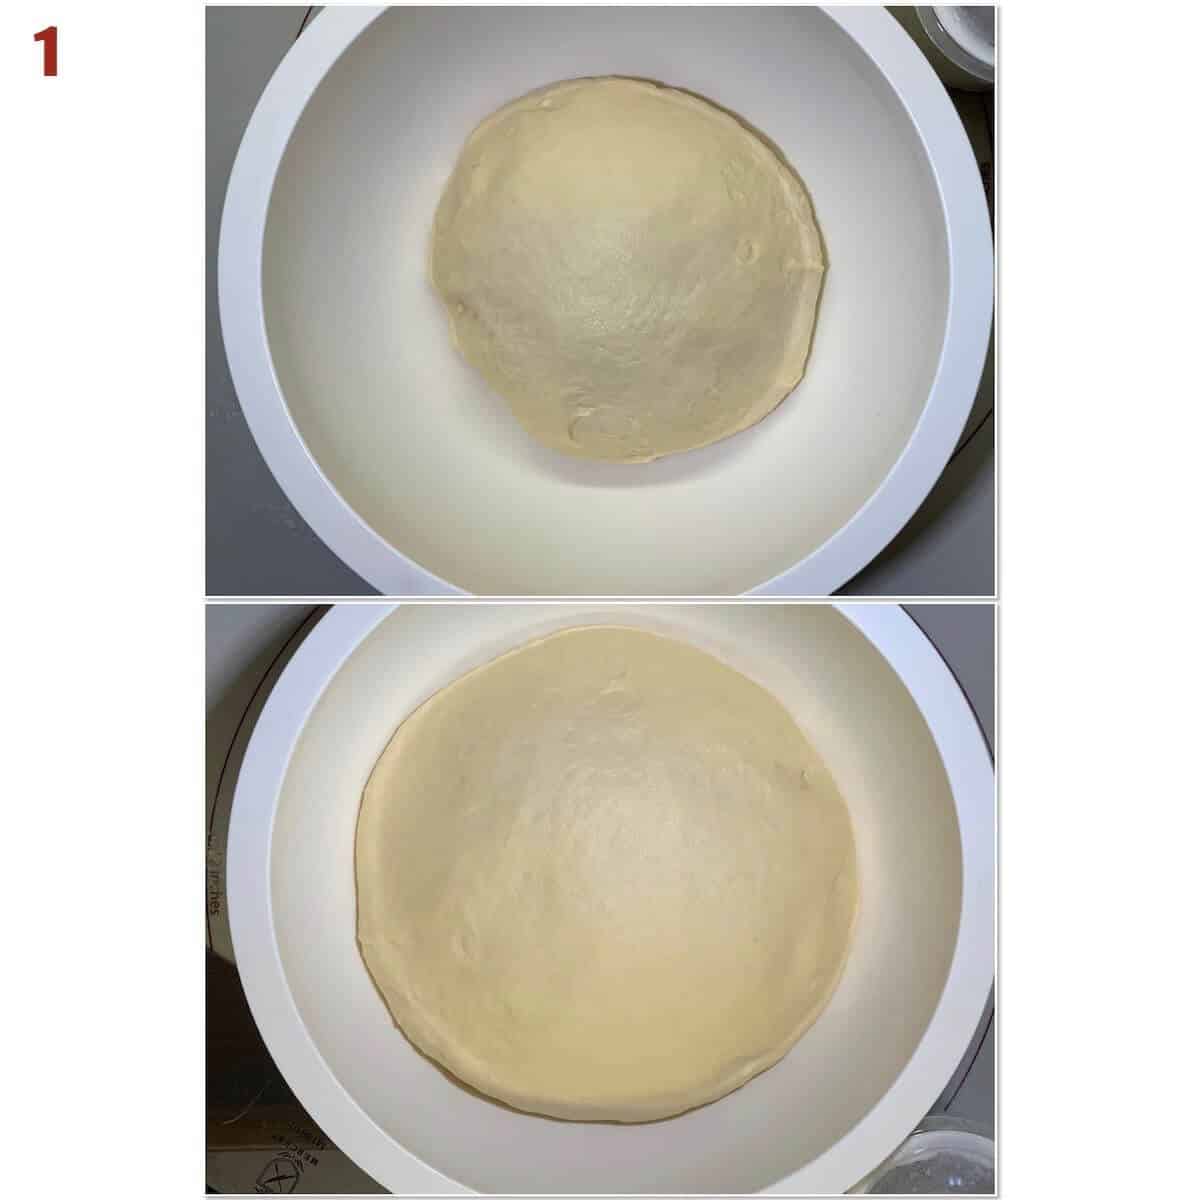 sourdough dinner roll dough in white bowl before & after rising collage